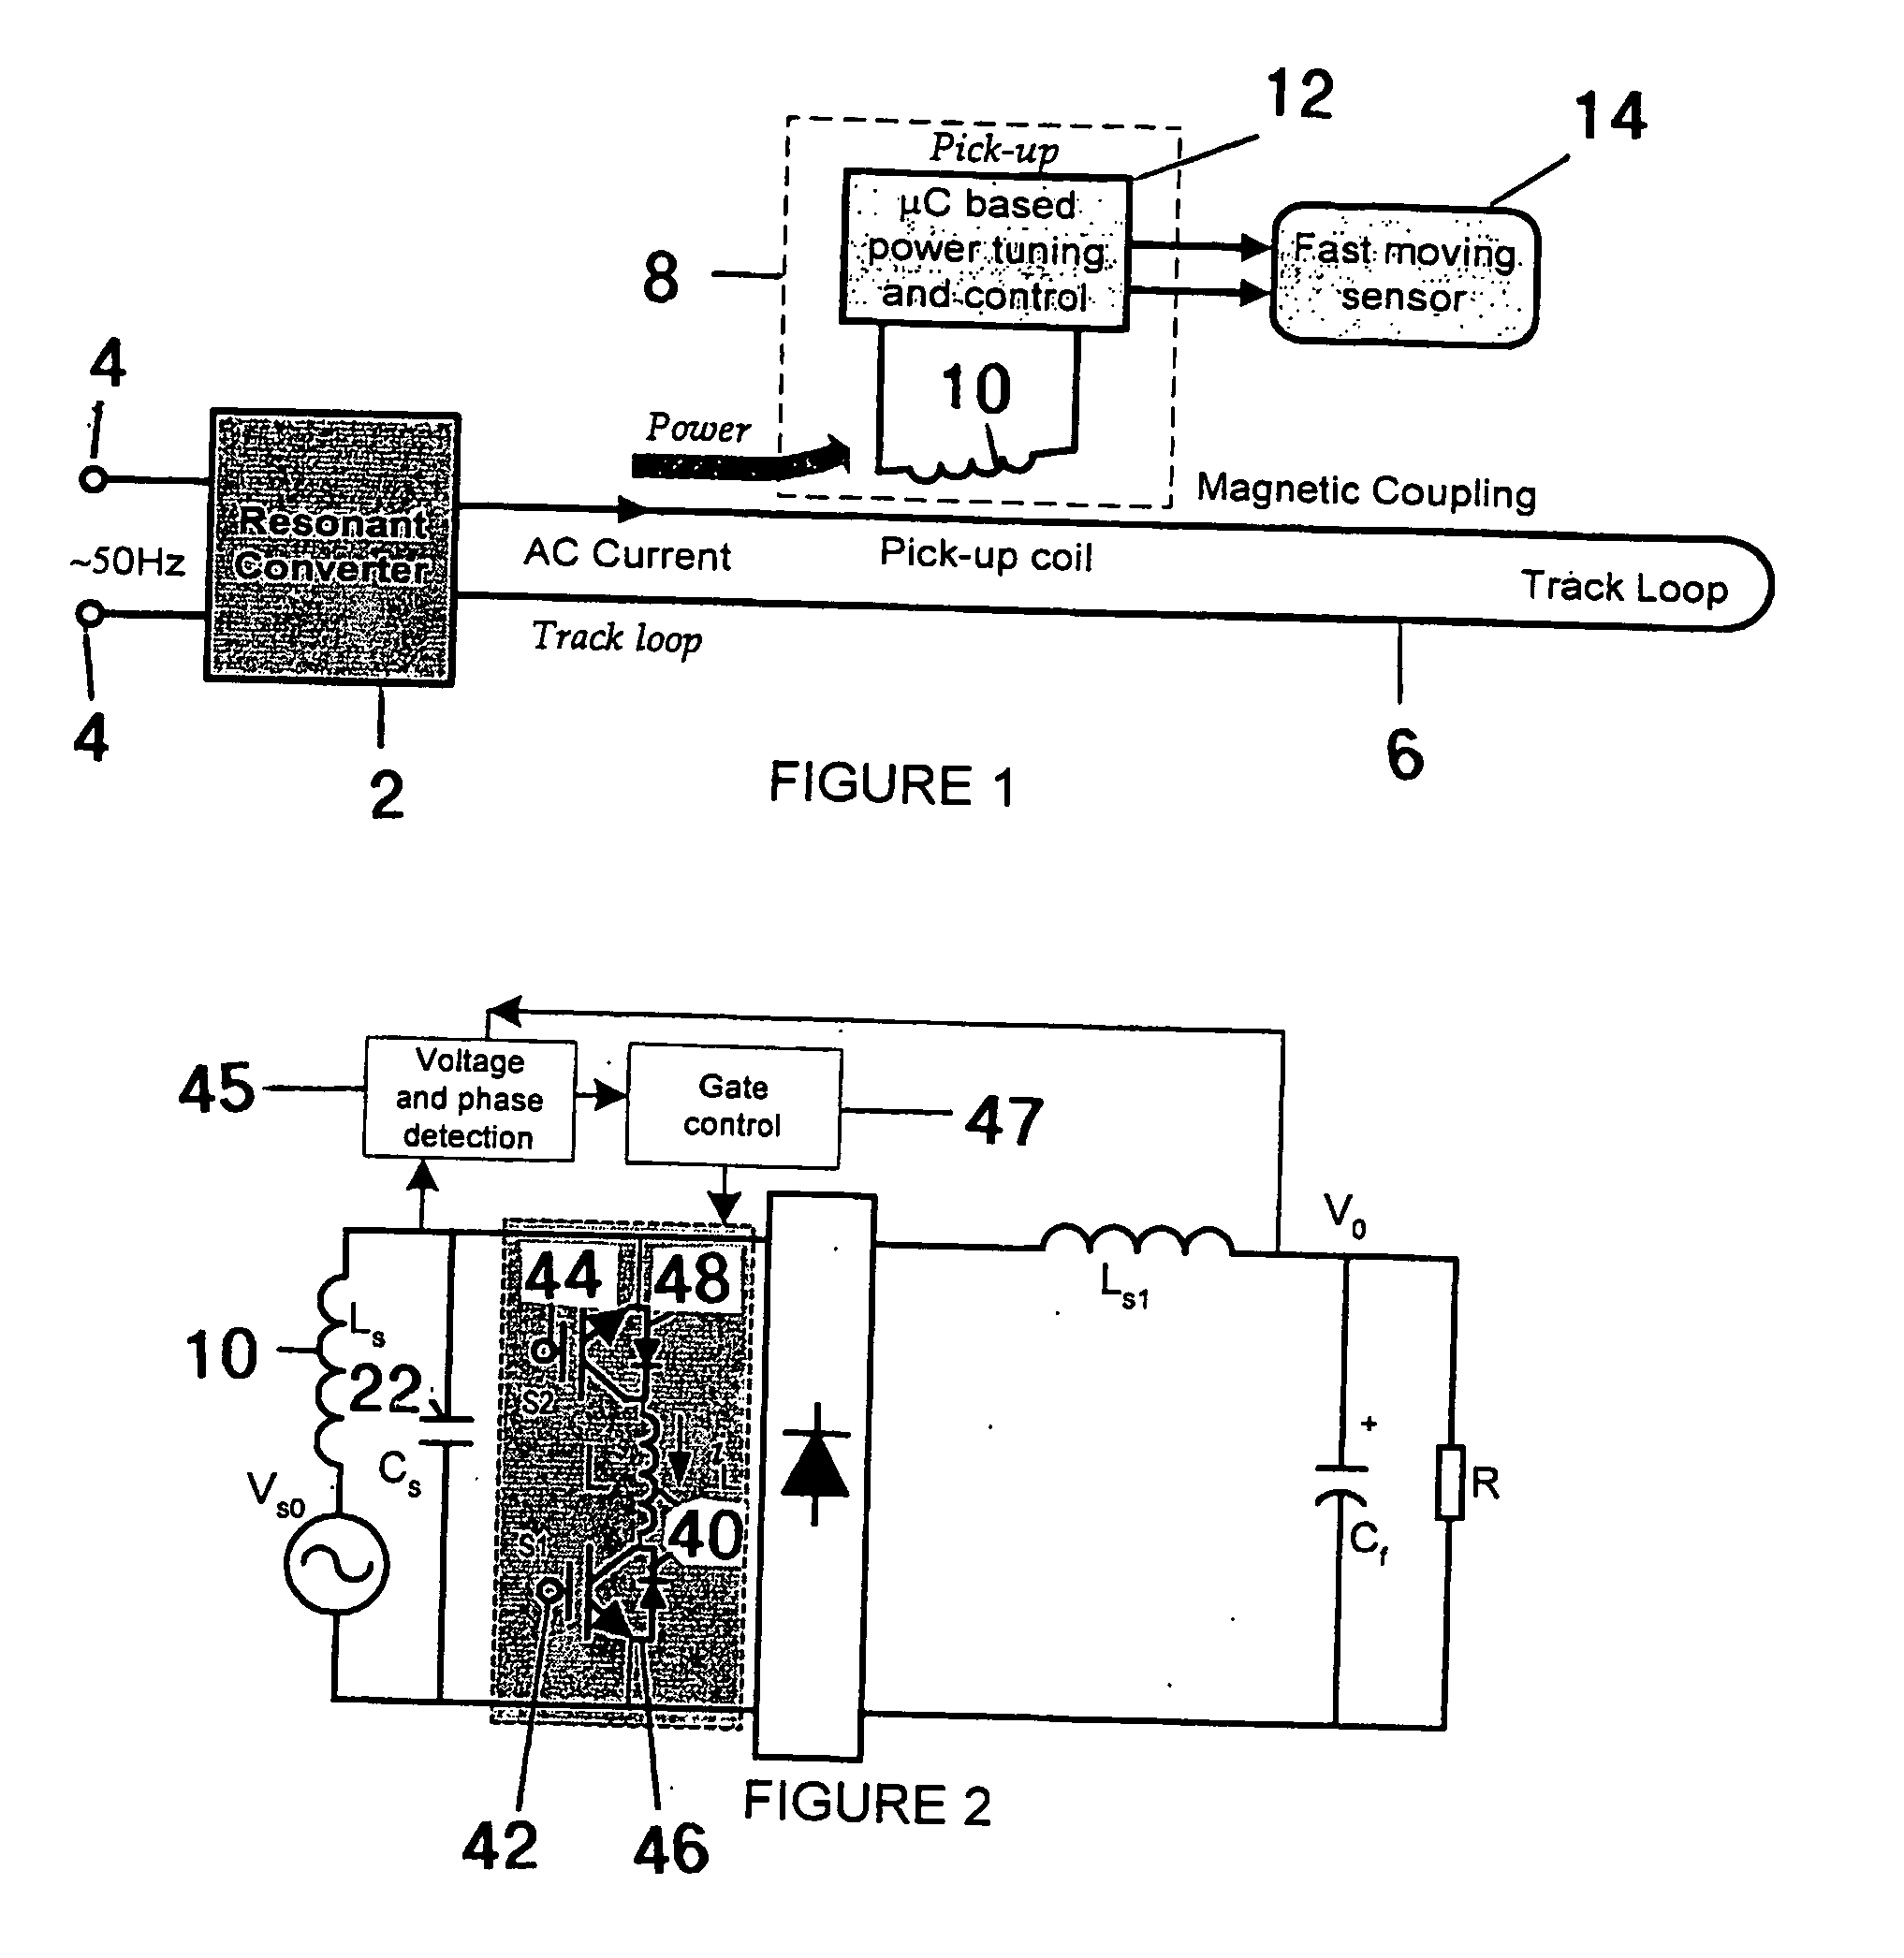 Methods and apparatus for control of inductively coupled power transfer systems